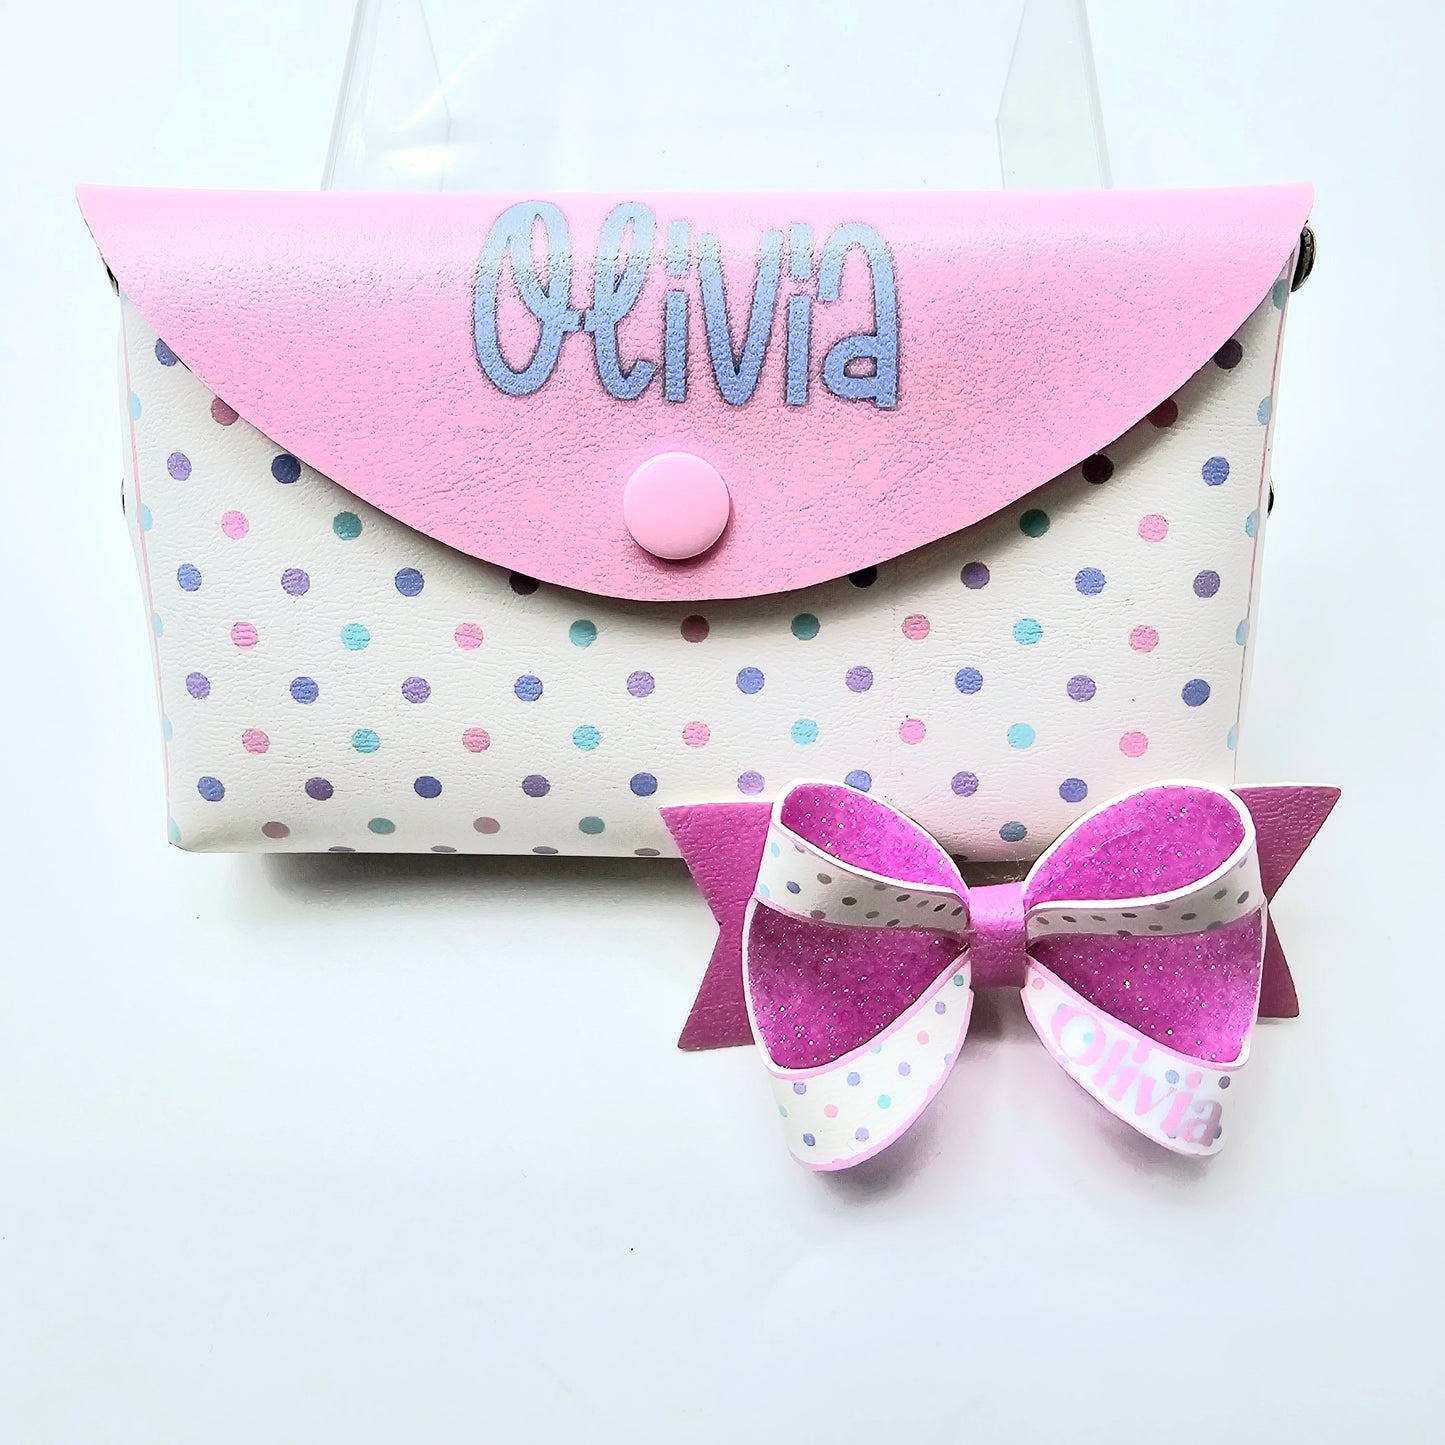 Double Sided Pastel Dotty Backed with Light Pink Glitter Bow Loops